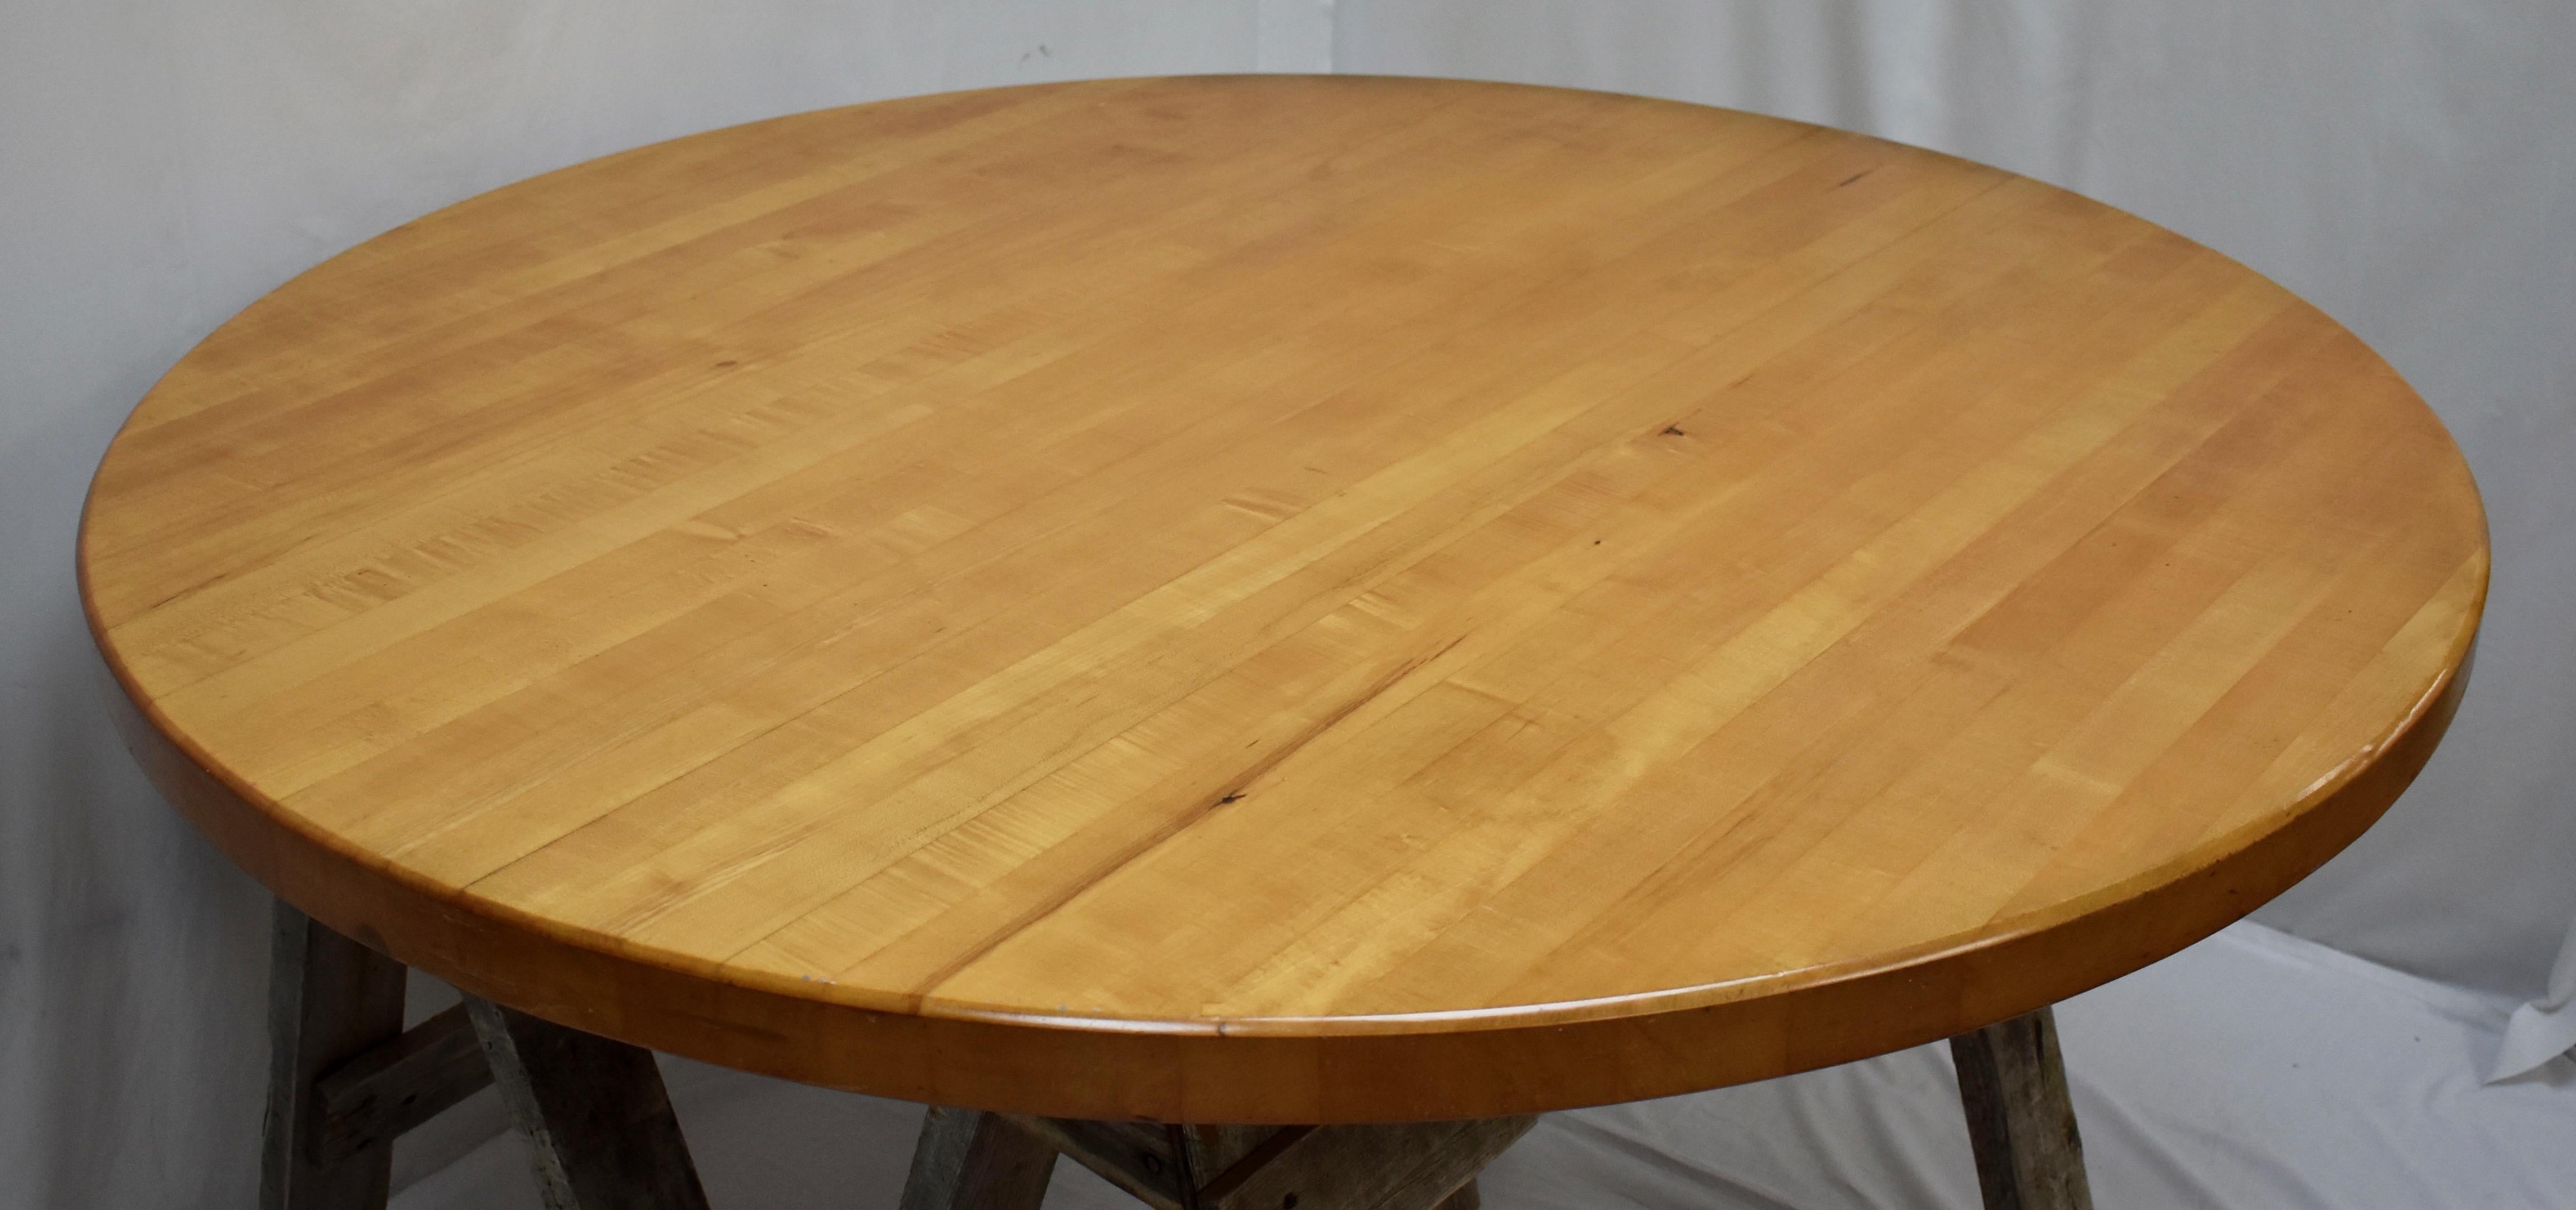 This massive butcher’s block style round tabletop only is made from laminated maple boards over 2” thick, and is only very lightly used. Set it on a sturdy iron base to create a great kitchen table or all-purpose work or play station. In a wipe-off